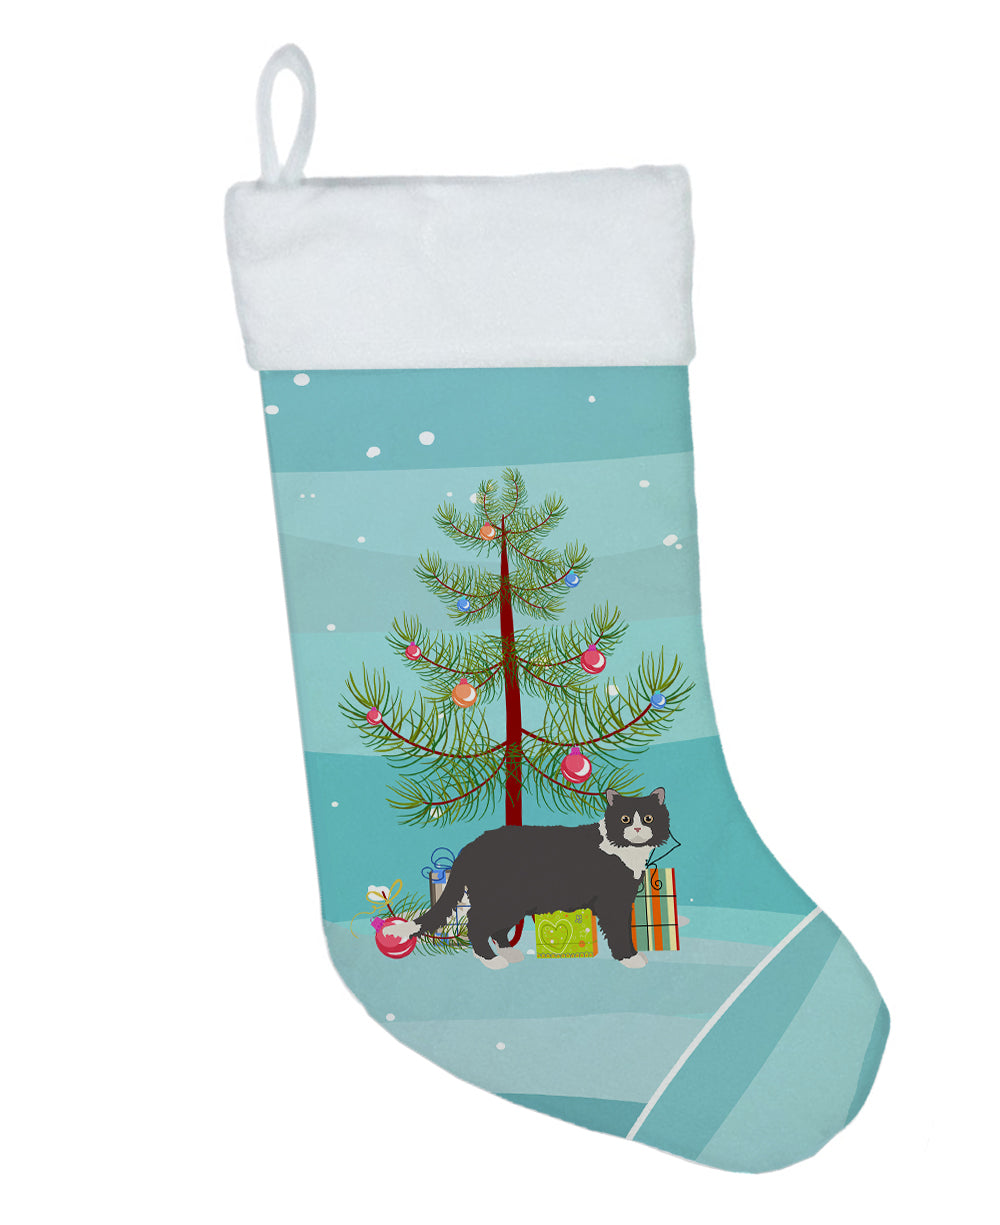 Poodle Cat #1 Cat Merry Christmas Christmas Stocking